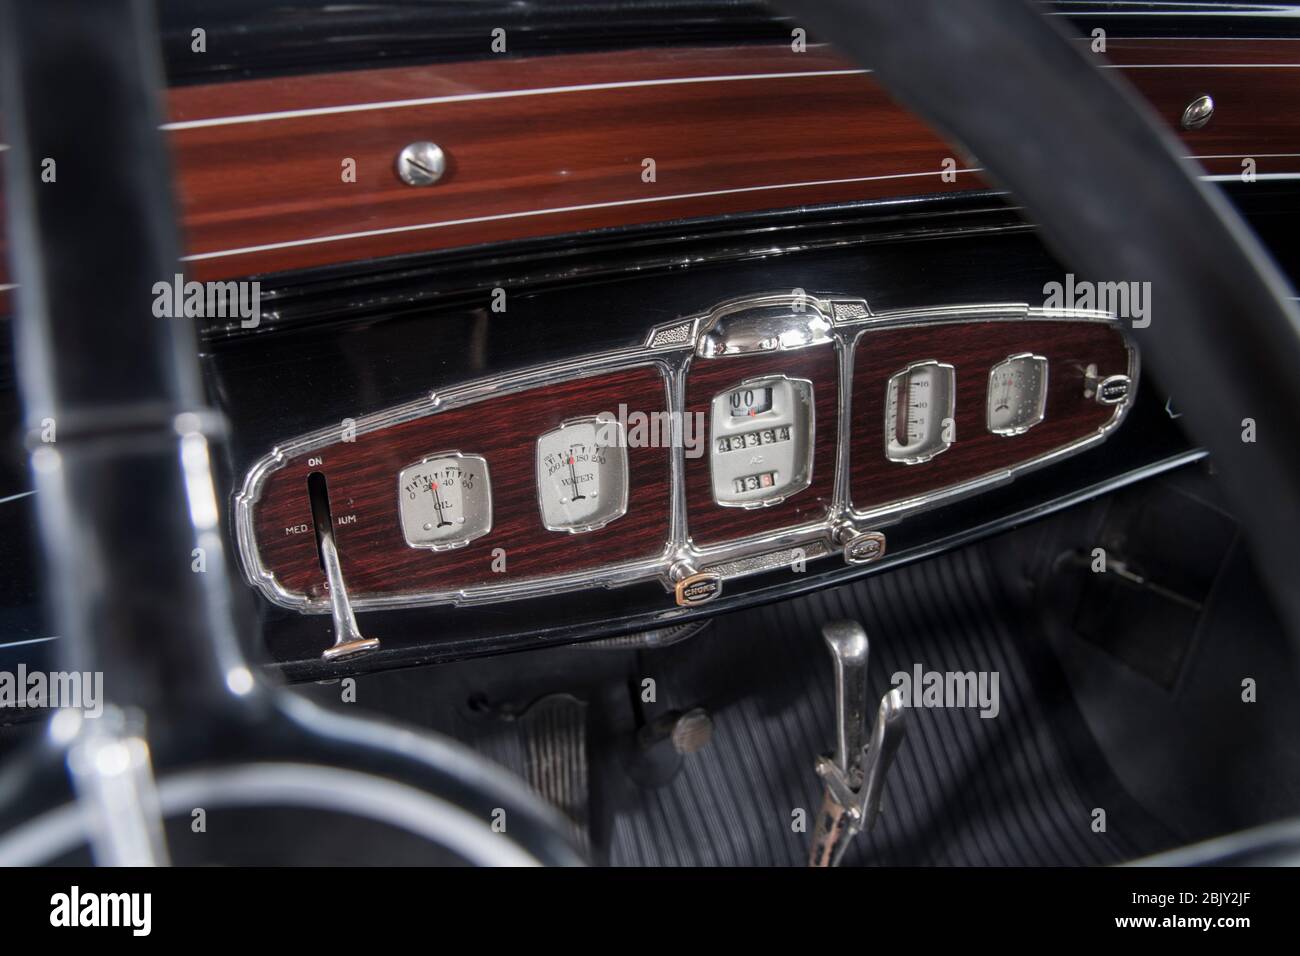 dashboard dials of a 1931 Buick car Stock Photo